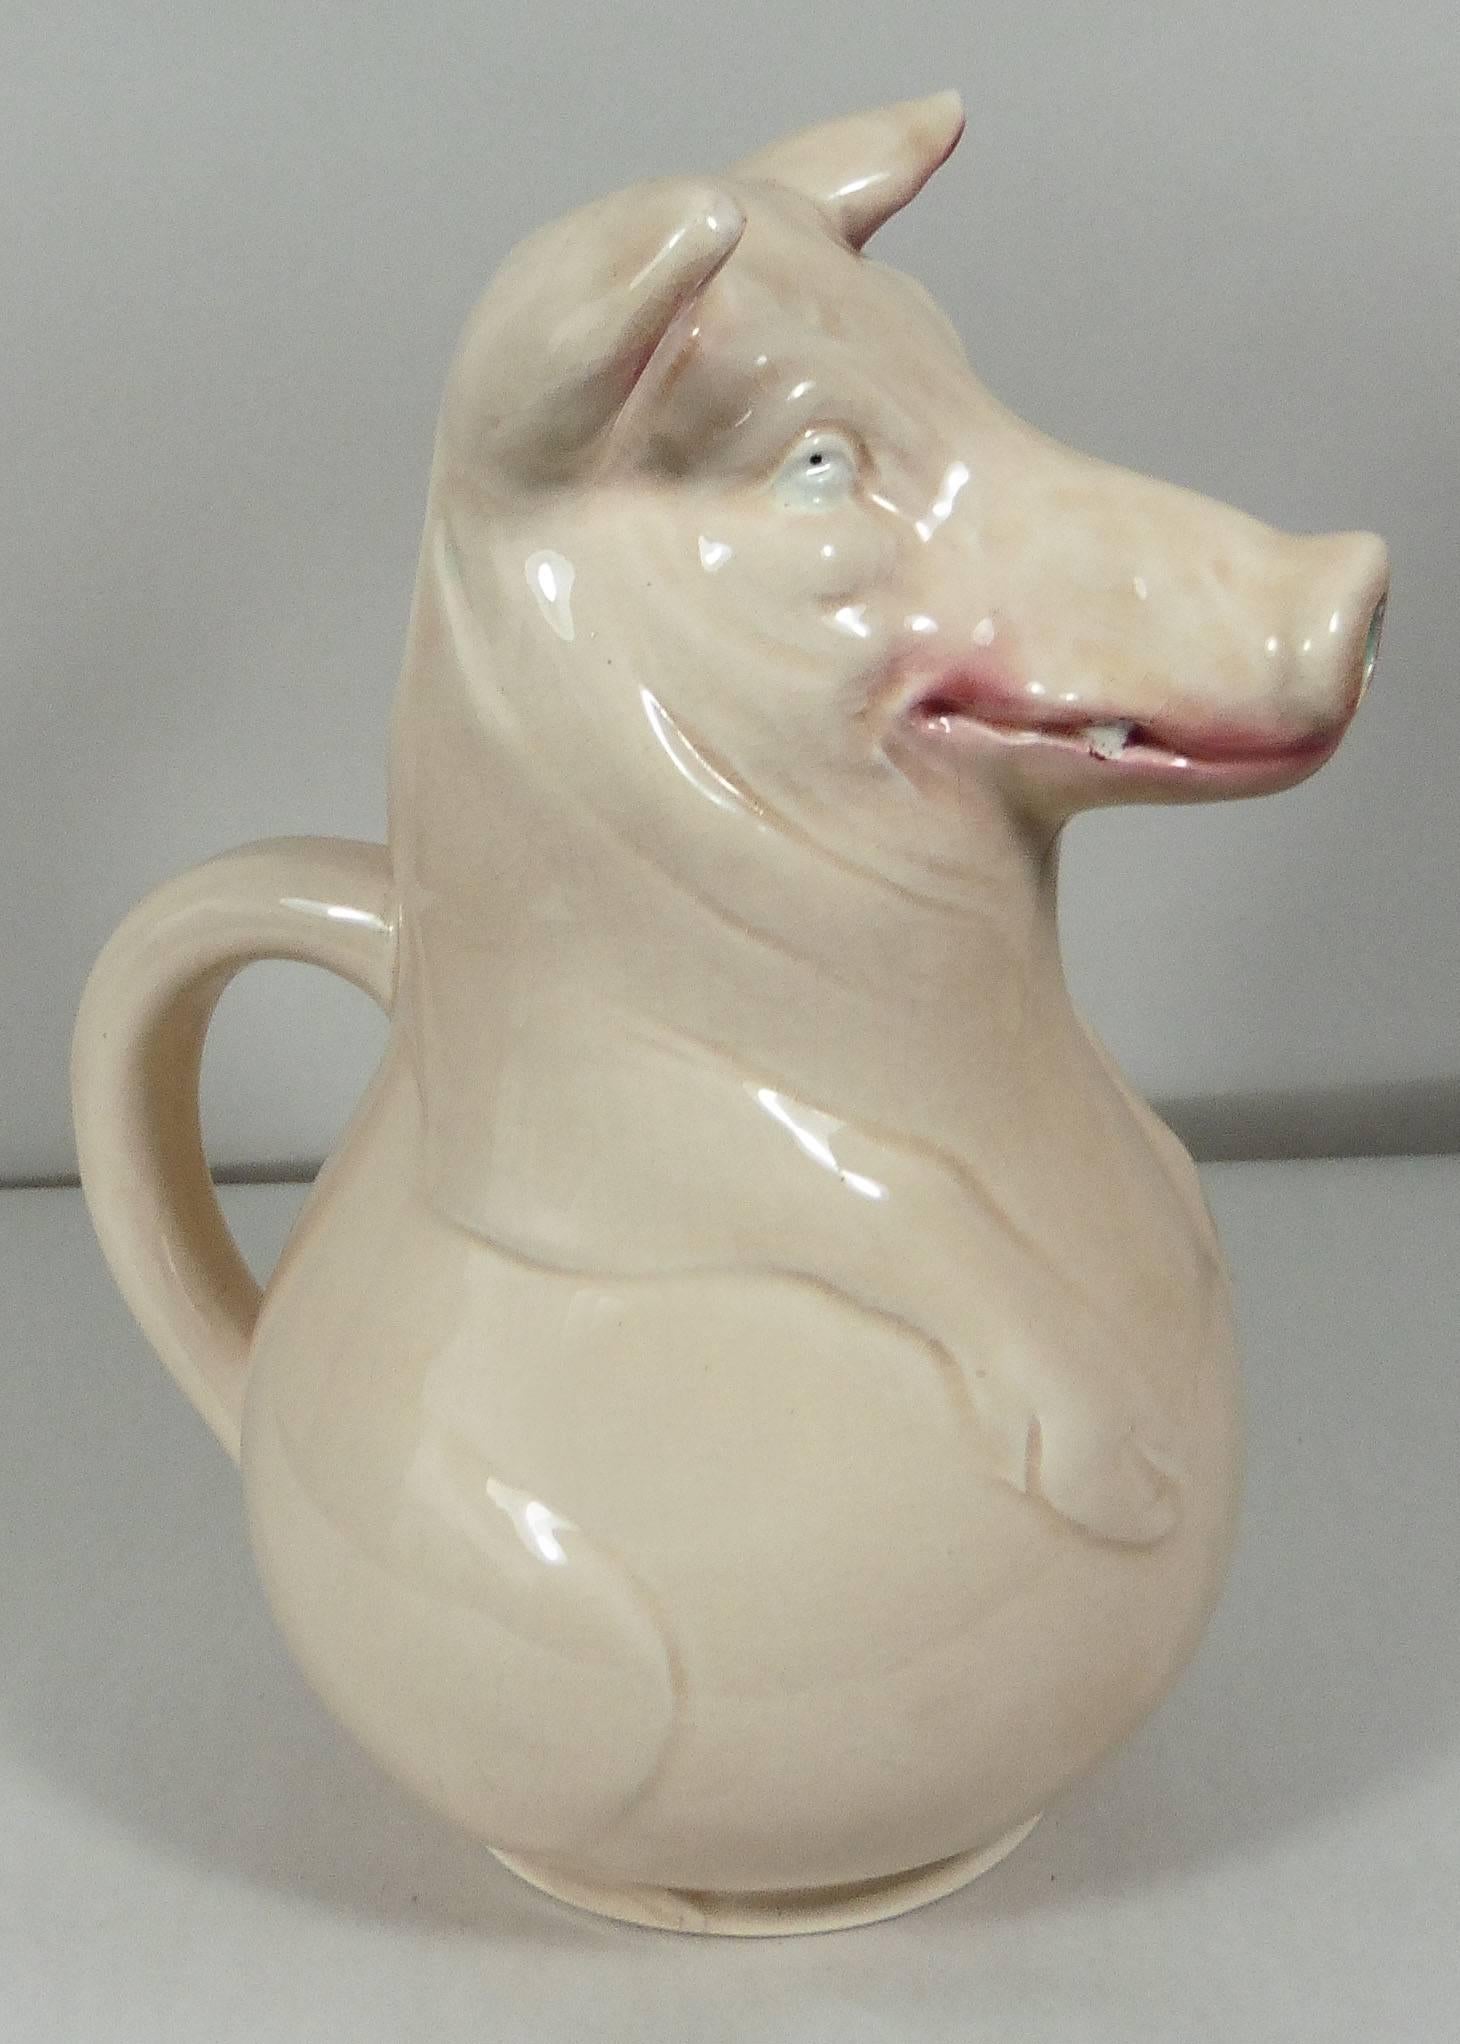 French Majolica pig pitcher signed Sarreguemines, circa 1900.
Reference / Page 32 